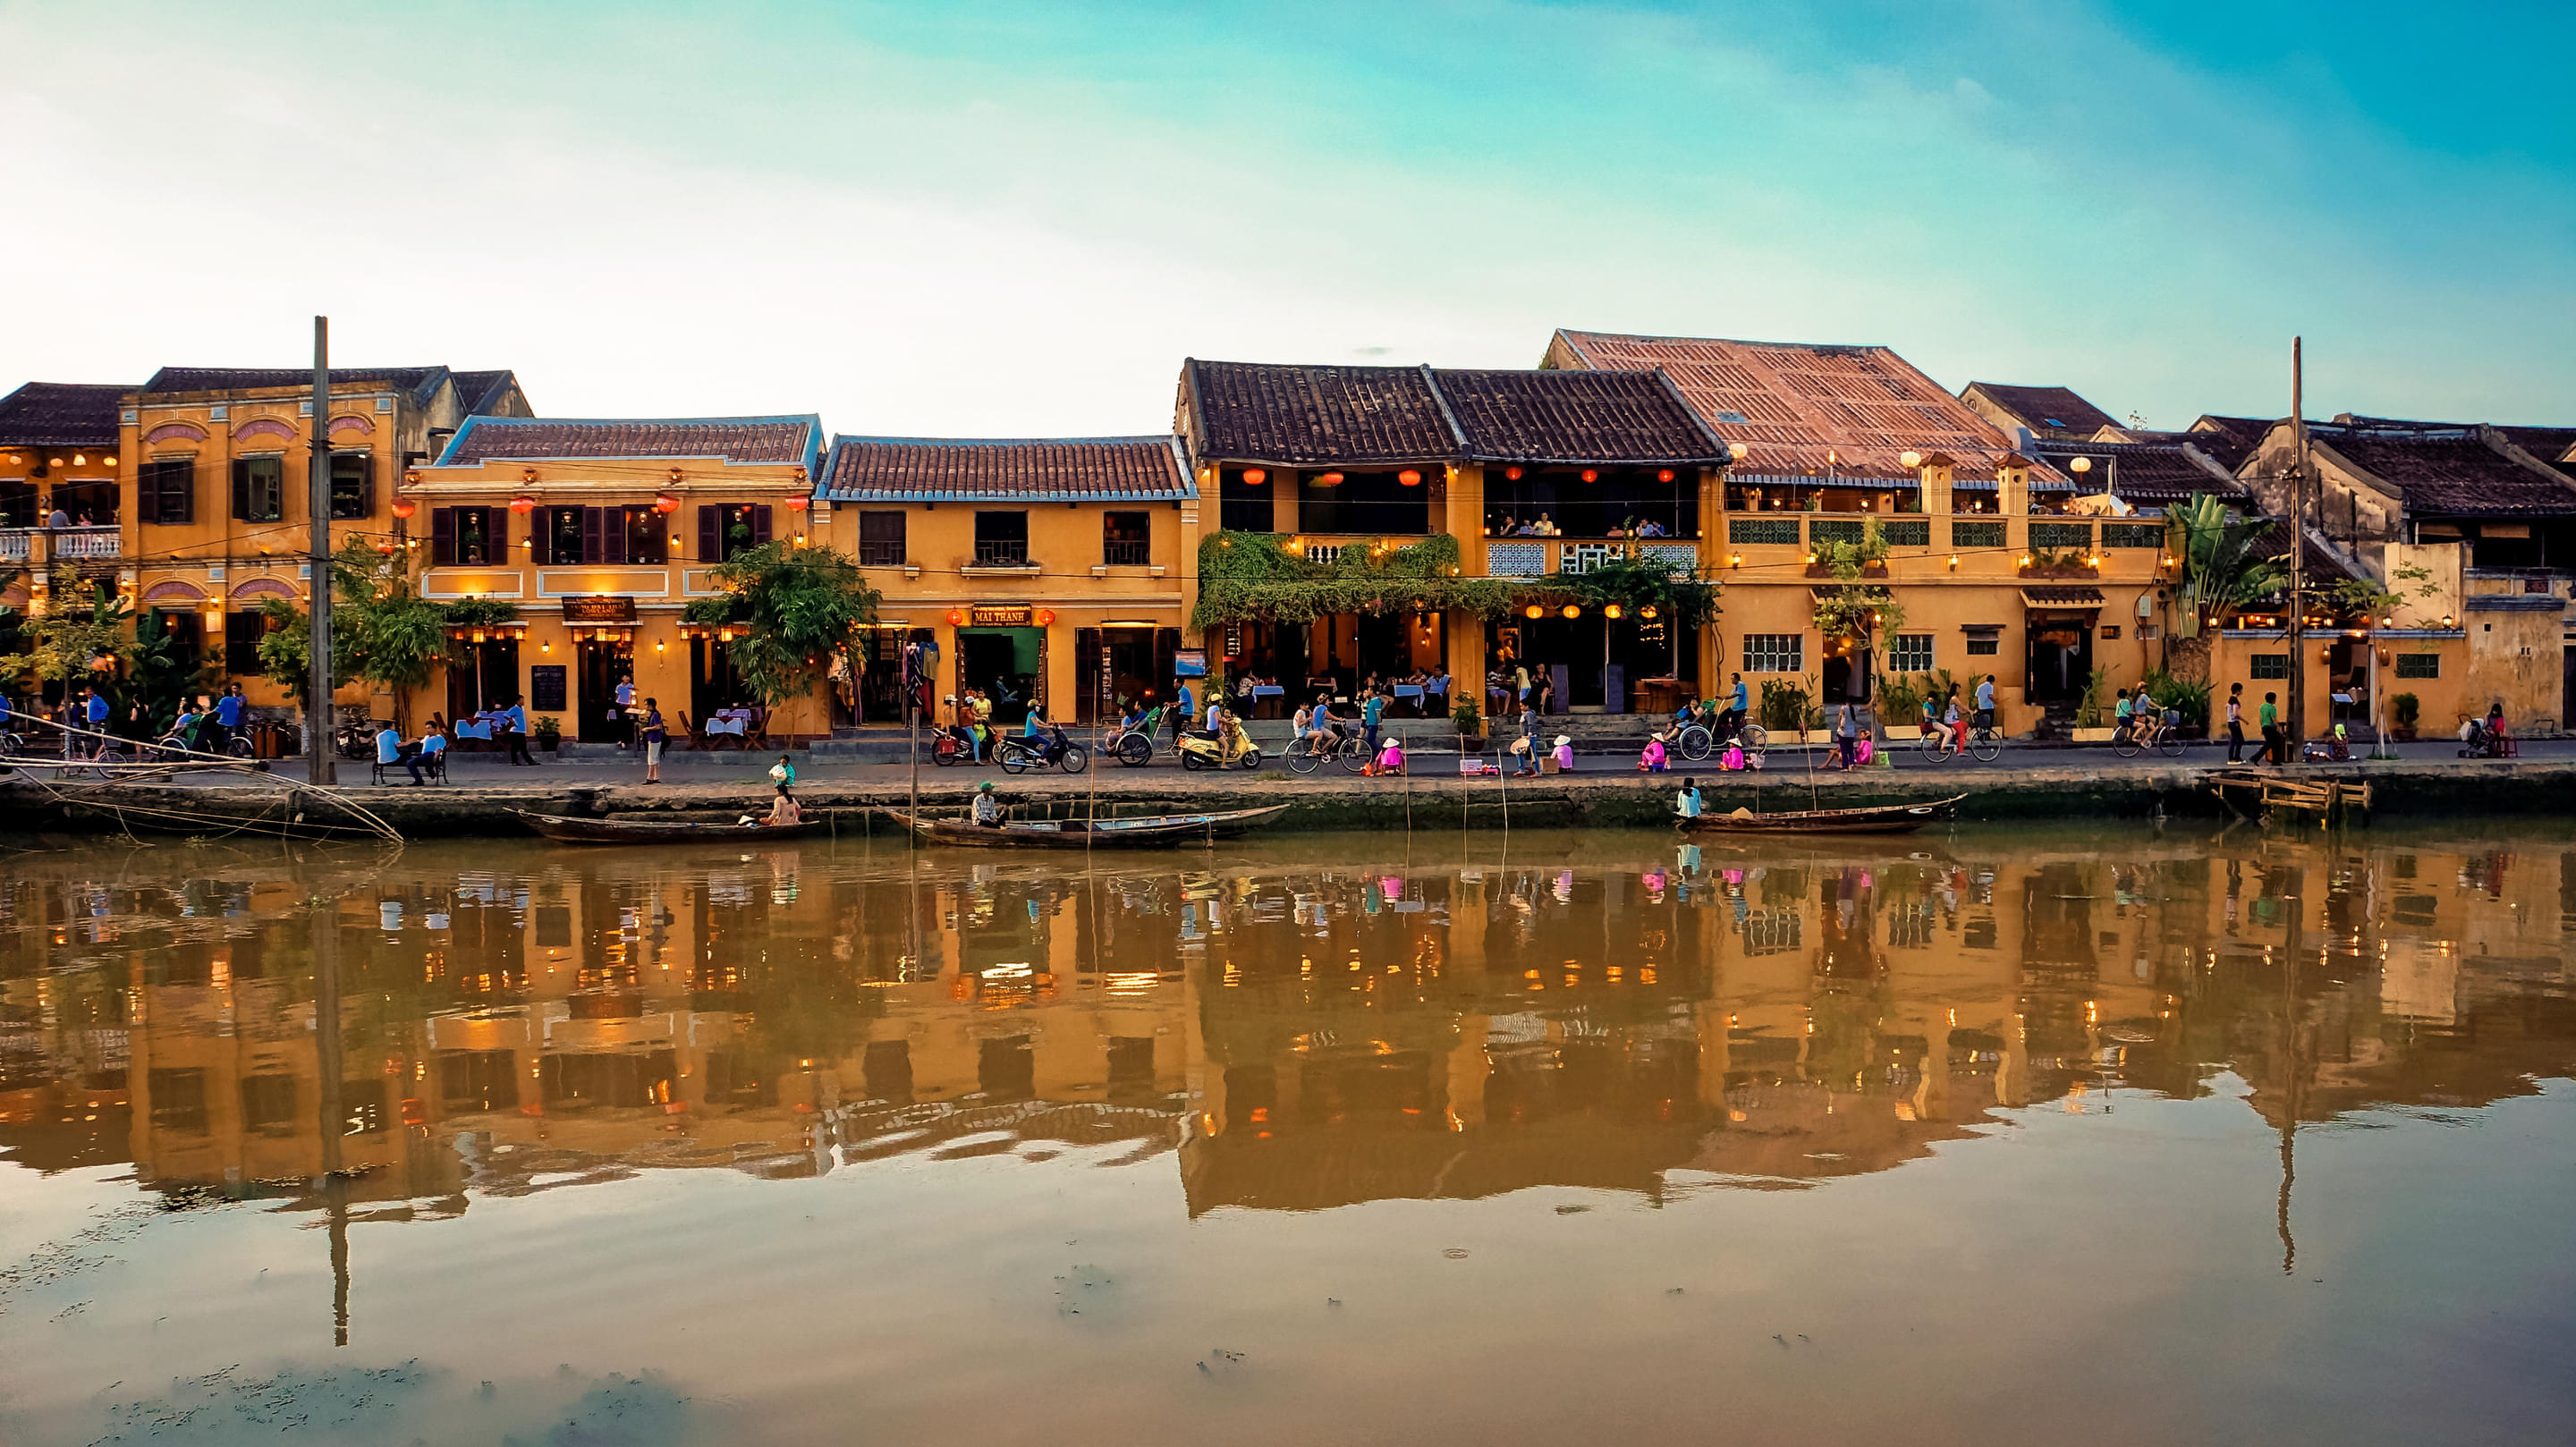 Hoi An Ancient Town Overview